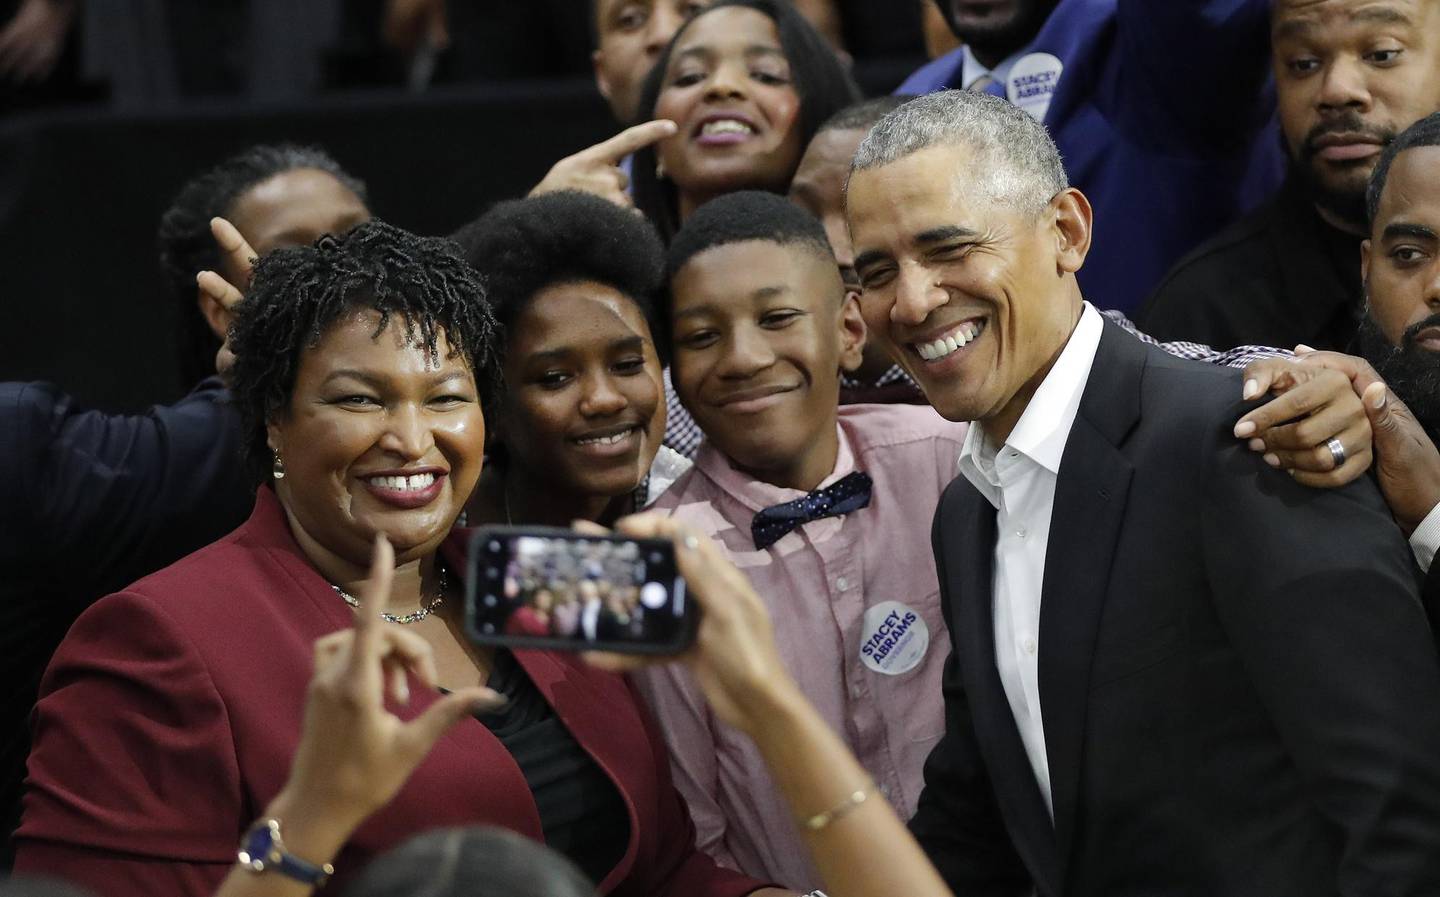 Former President Barack Obama and Democratic candidate for Georgia Governor Stacey Abrams pose for a photograph with two unidentified family members after a campaign rally at Morehouse College Friday, Nov. 2, 2018, in Atlanta. (AP Photo/John Bazemore)